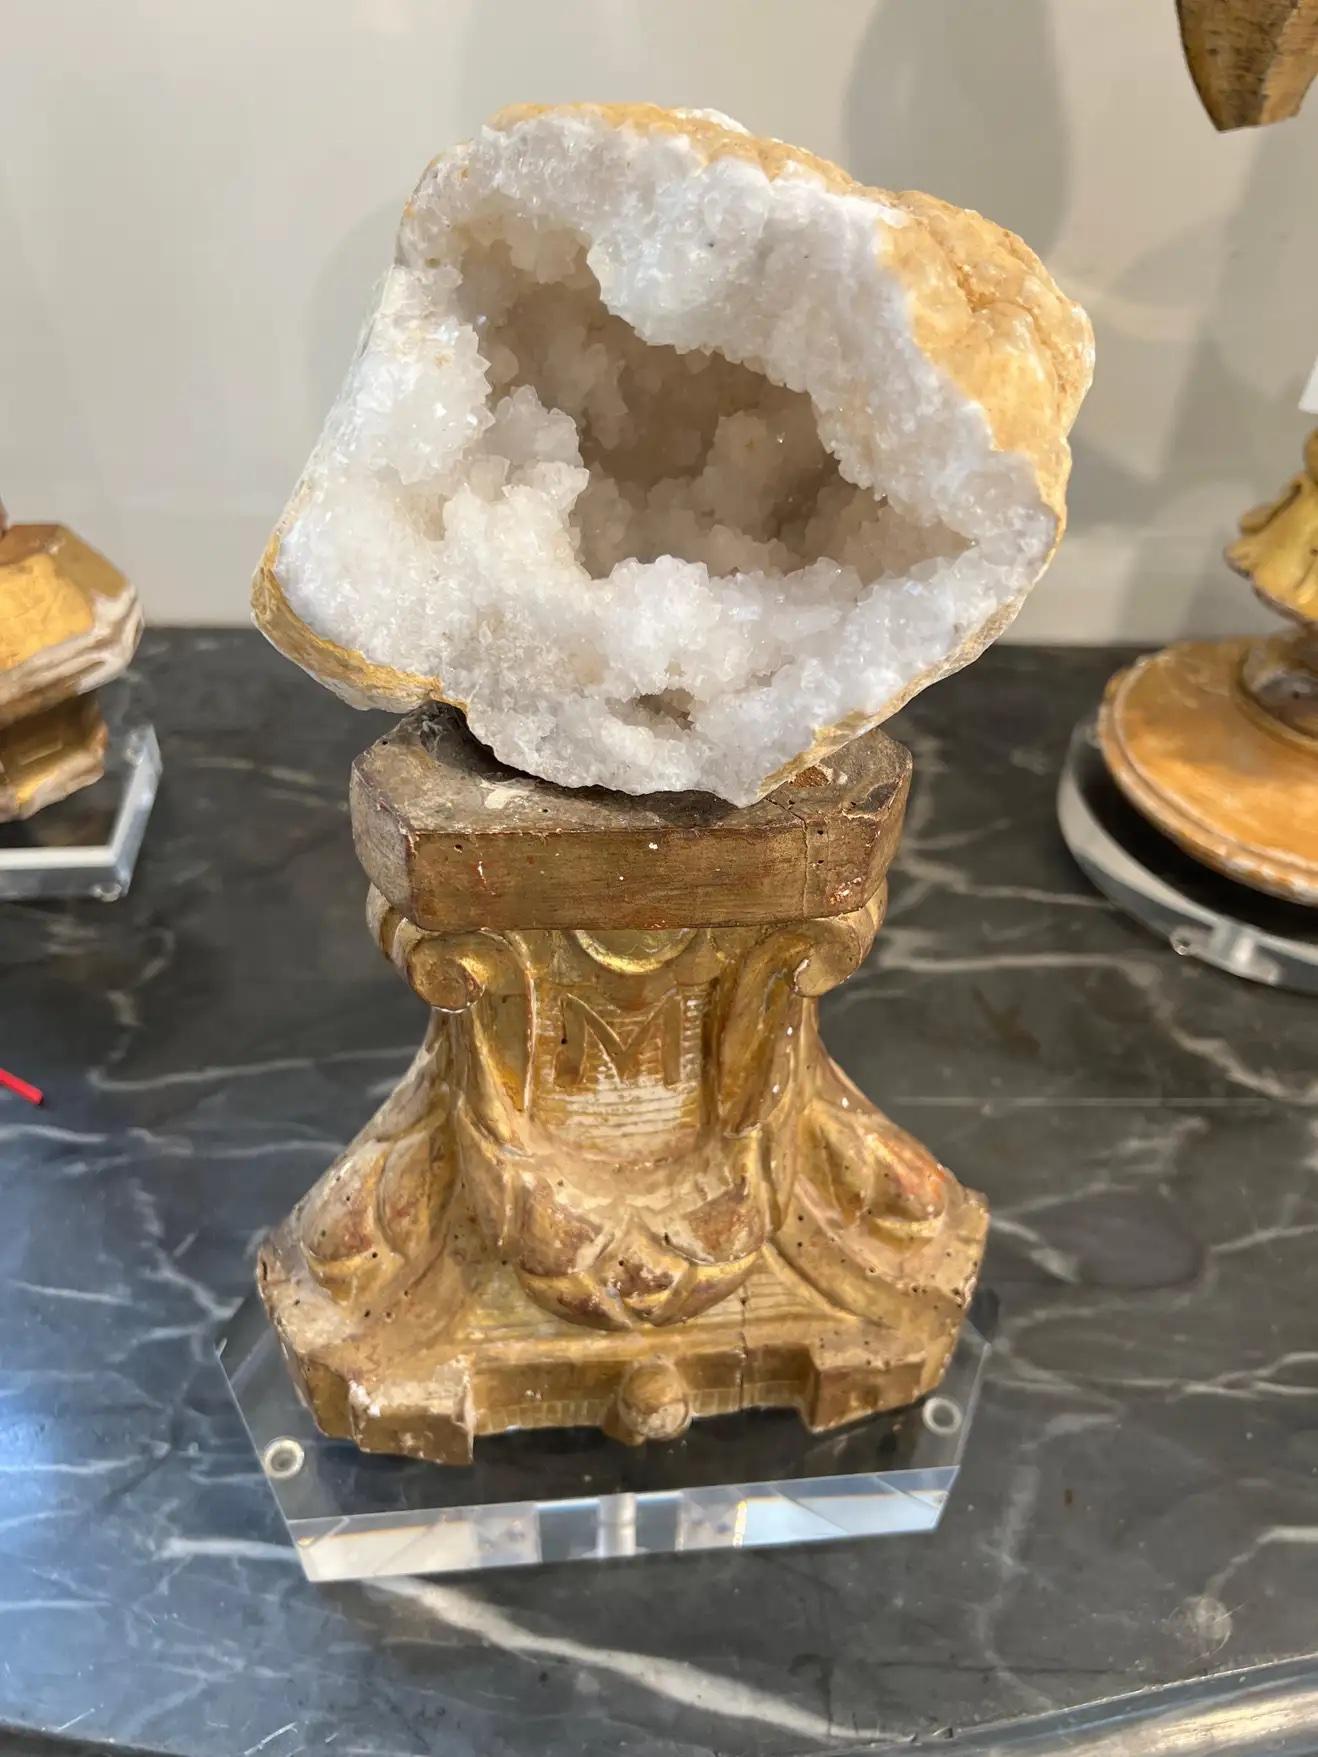 A beautiful architectural remnant has been re-worked into a pedestal for a polished geod. All is then placed on a customized acrylic base for a very sophisticated, finished look.